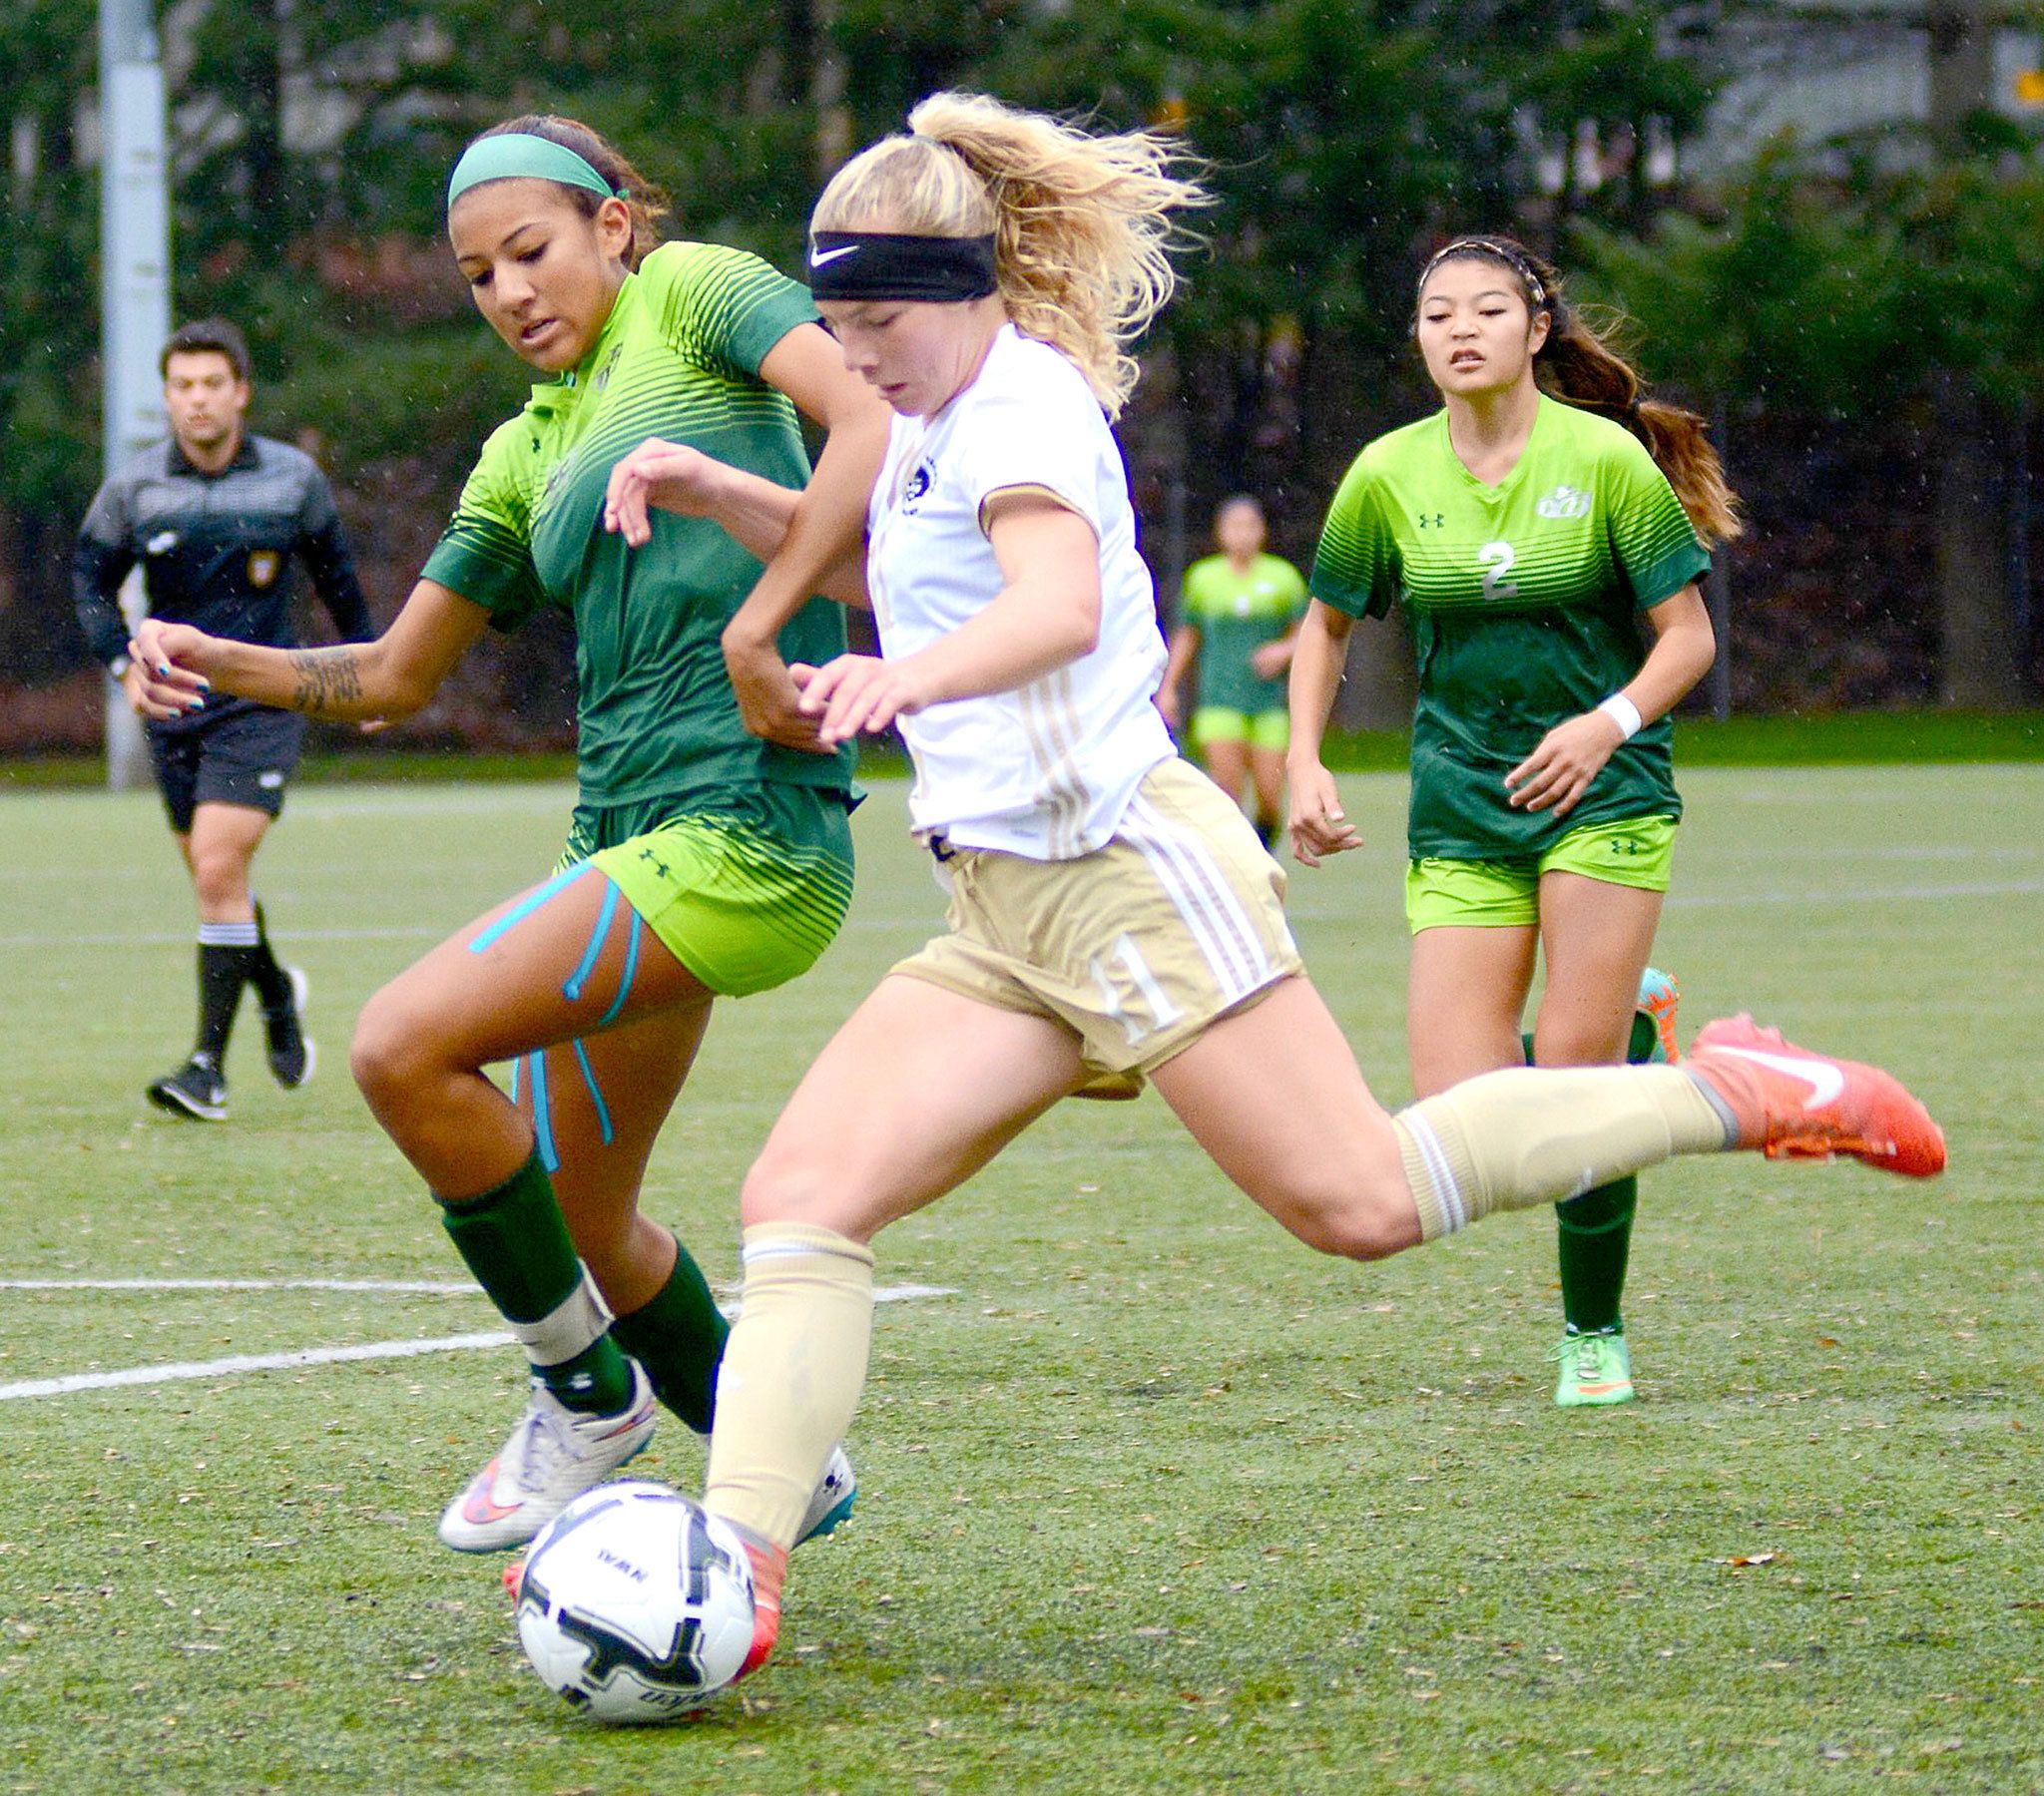 Jay Cline/For the Peninsula Daily News Peninsula’ Maddy Parton (11) dribbles against Highline during the women’s championship match Sunday. The women won in the second overtime 1-0.